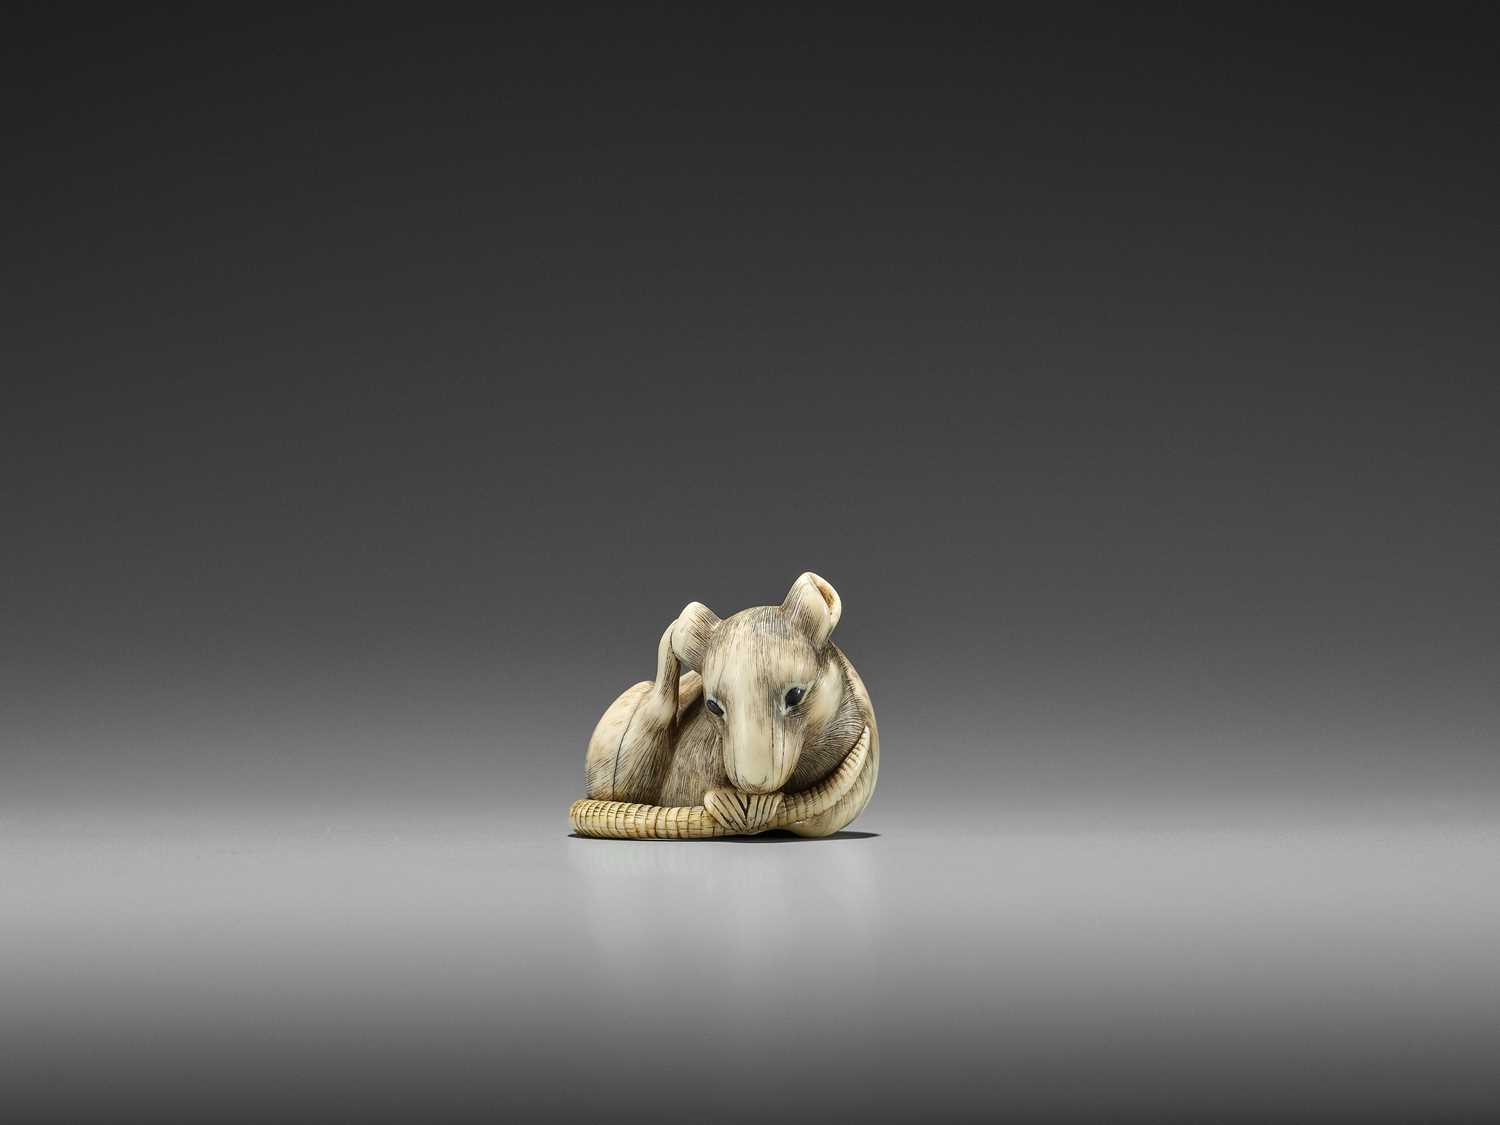 Lot 48 - AN EXCEPTIONAL KYOTO SCHOOL IVORY NETSUKE OF A RAT